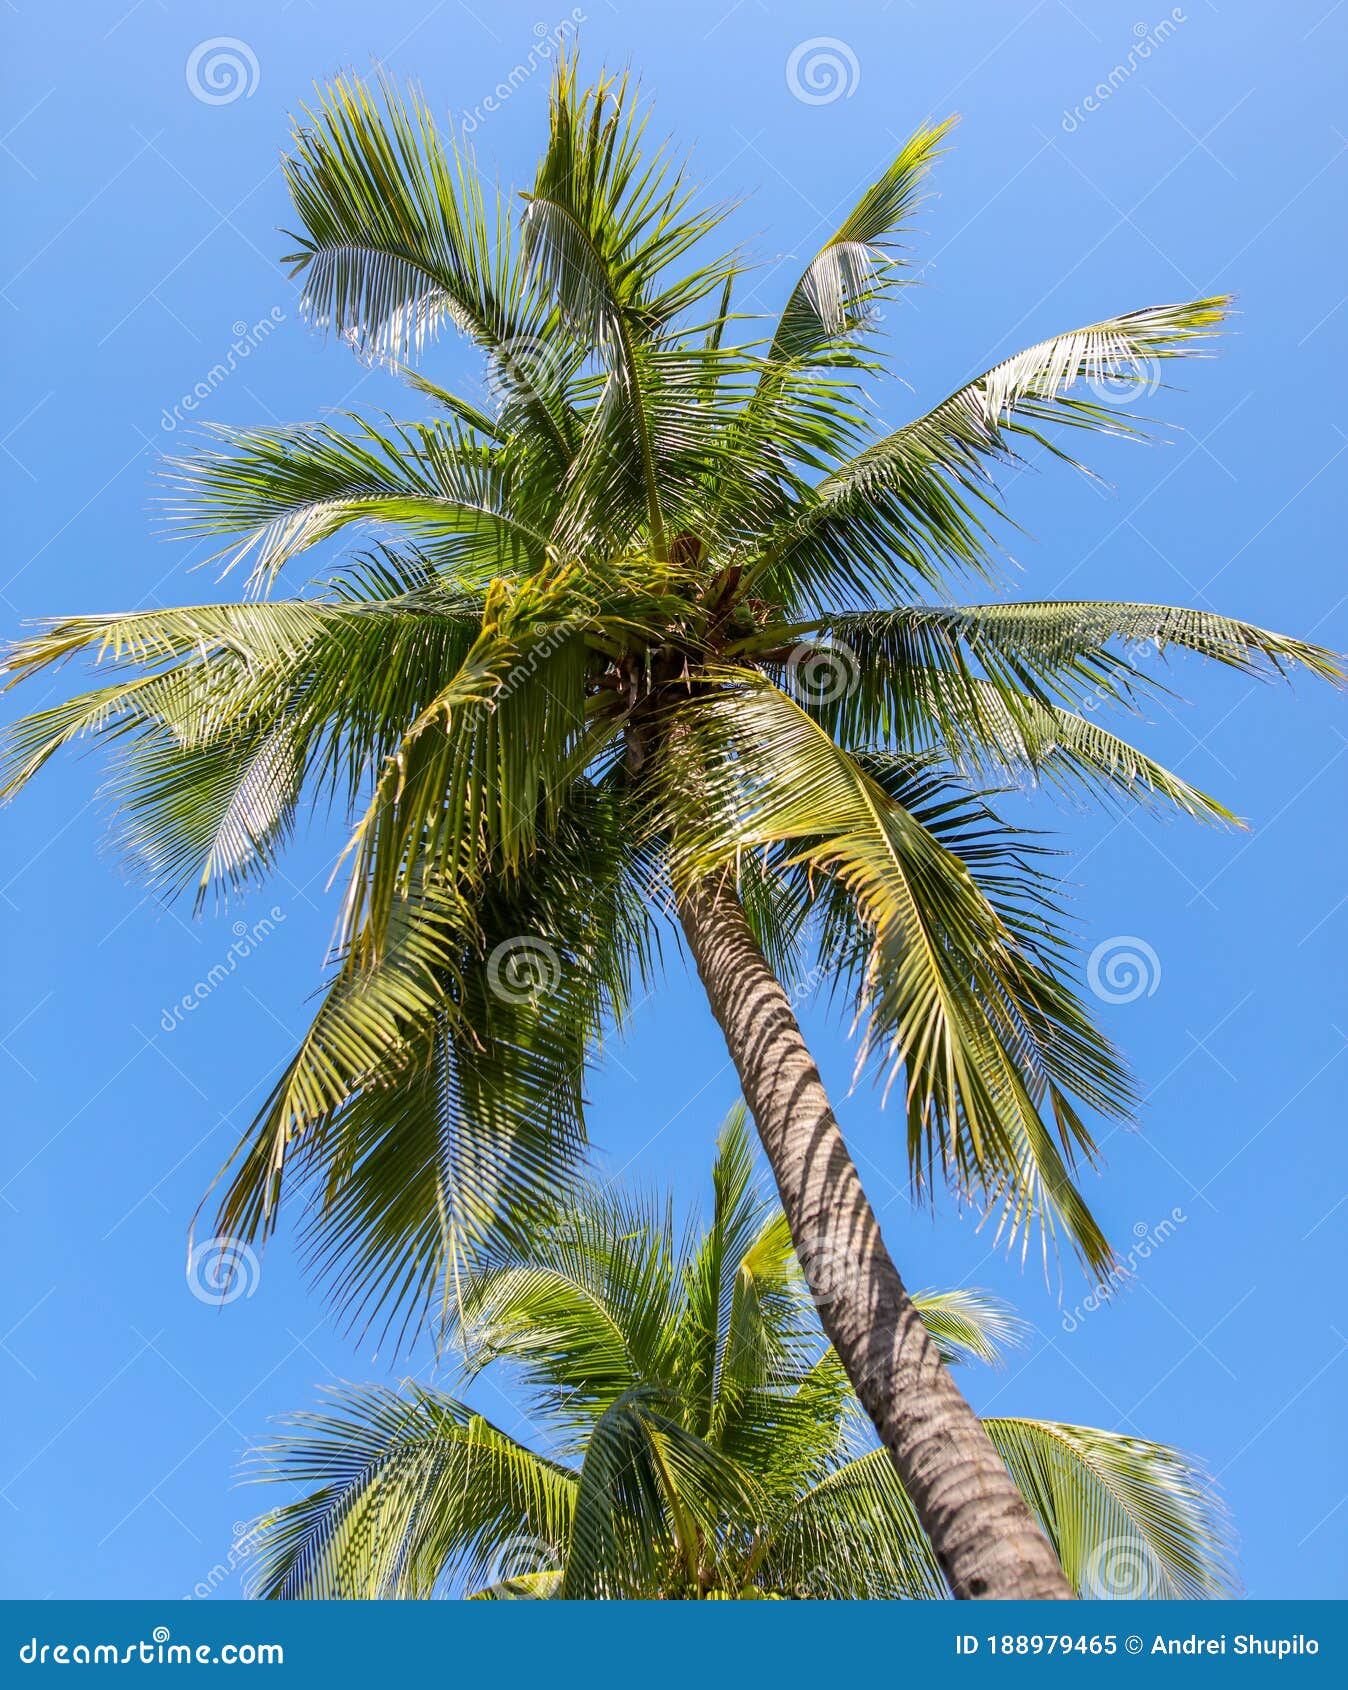 Large Green Branches on Coconut Trees Against the Sky Stock Image ...